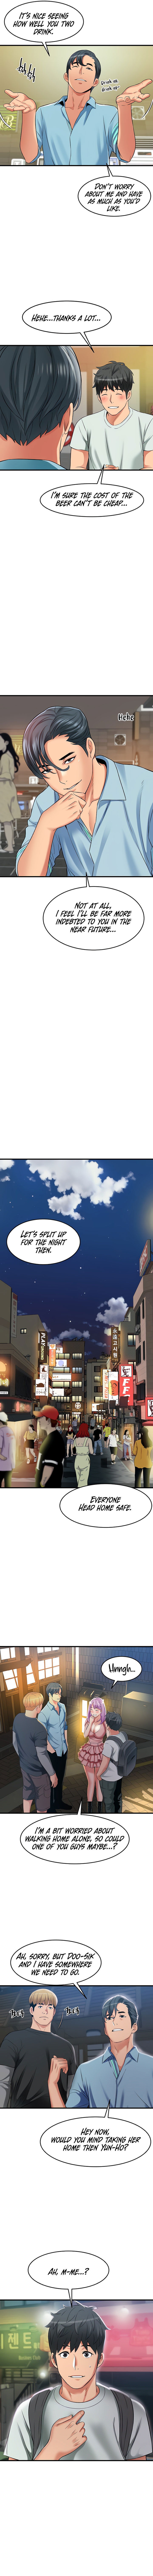 an-alley-story-chap-22-5